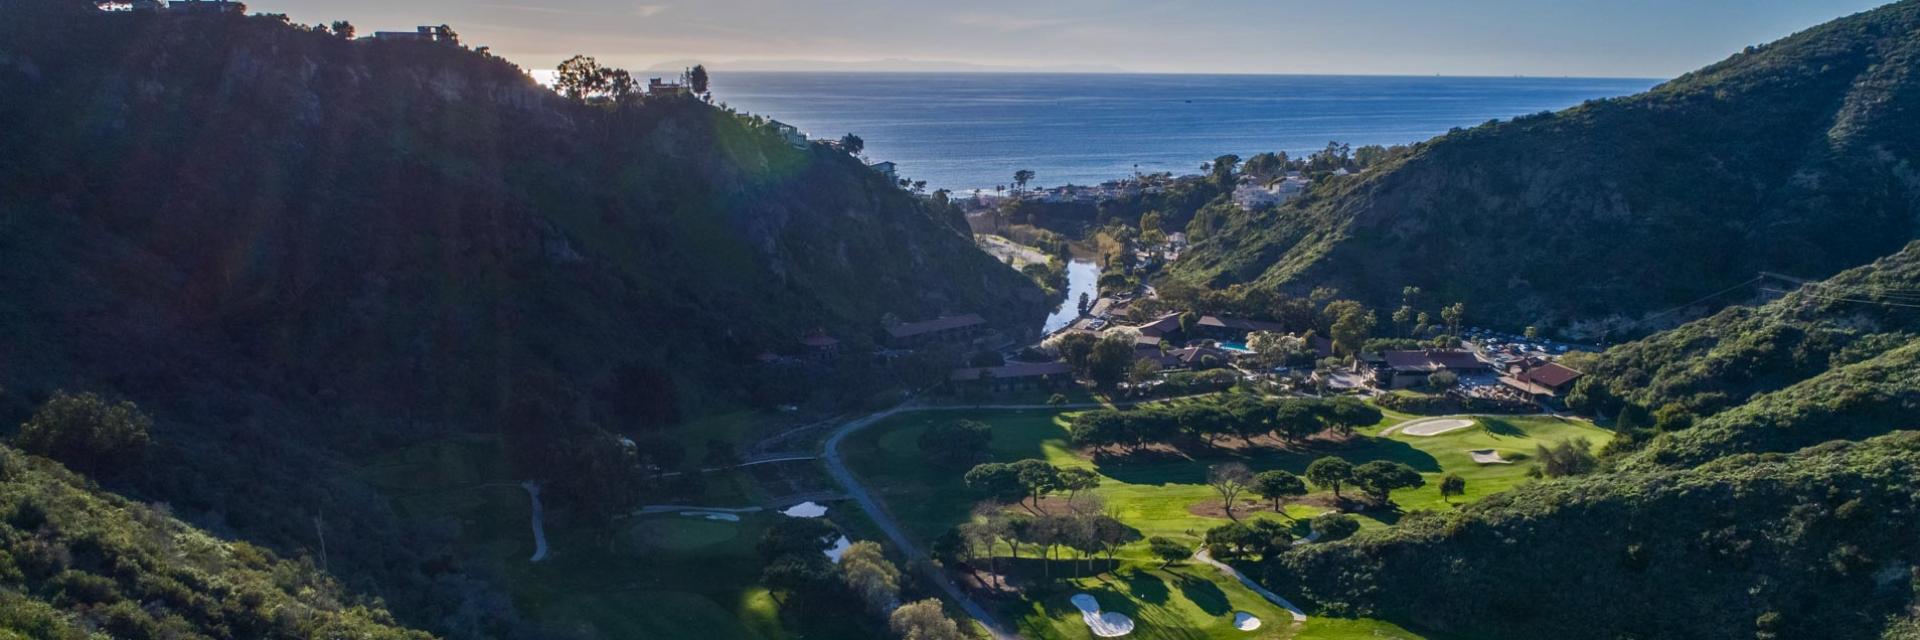 Aerial view of The Ranch at Laguna Beach, with the Pacific Ocean.